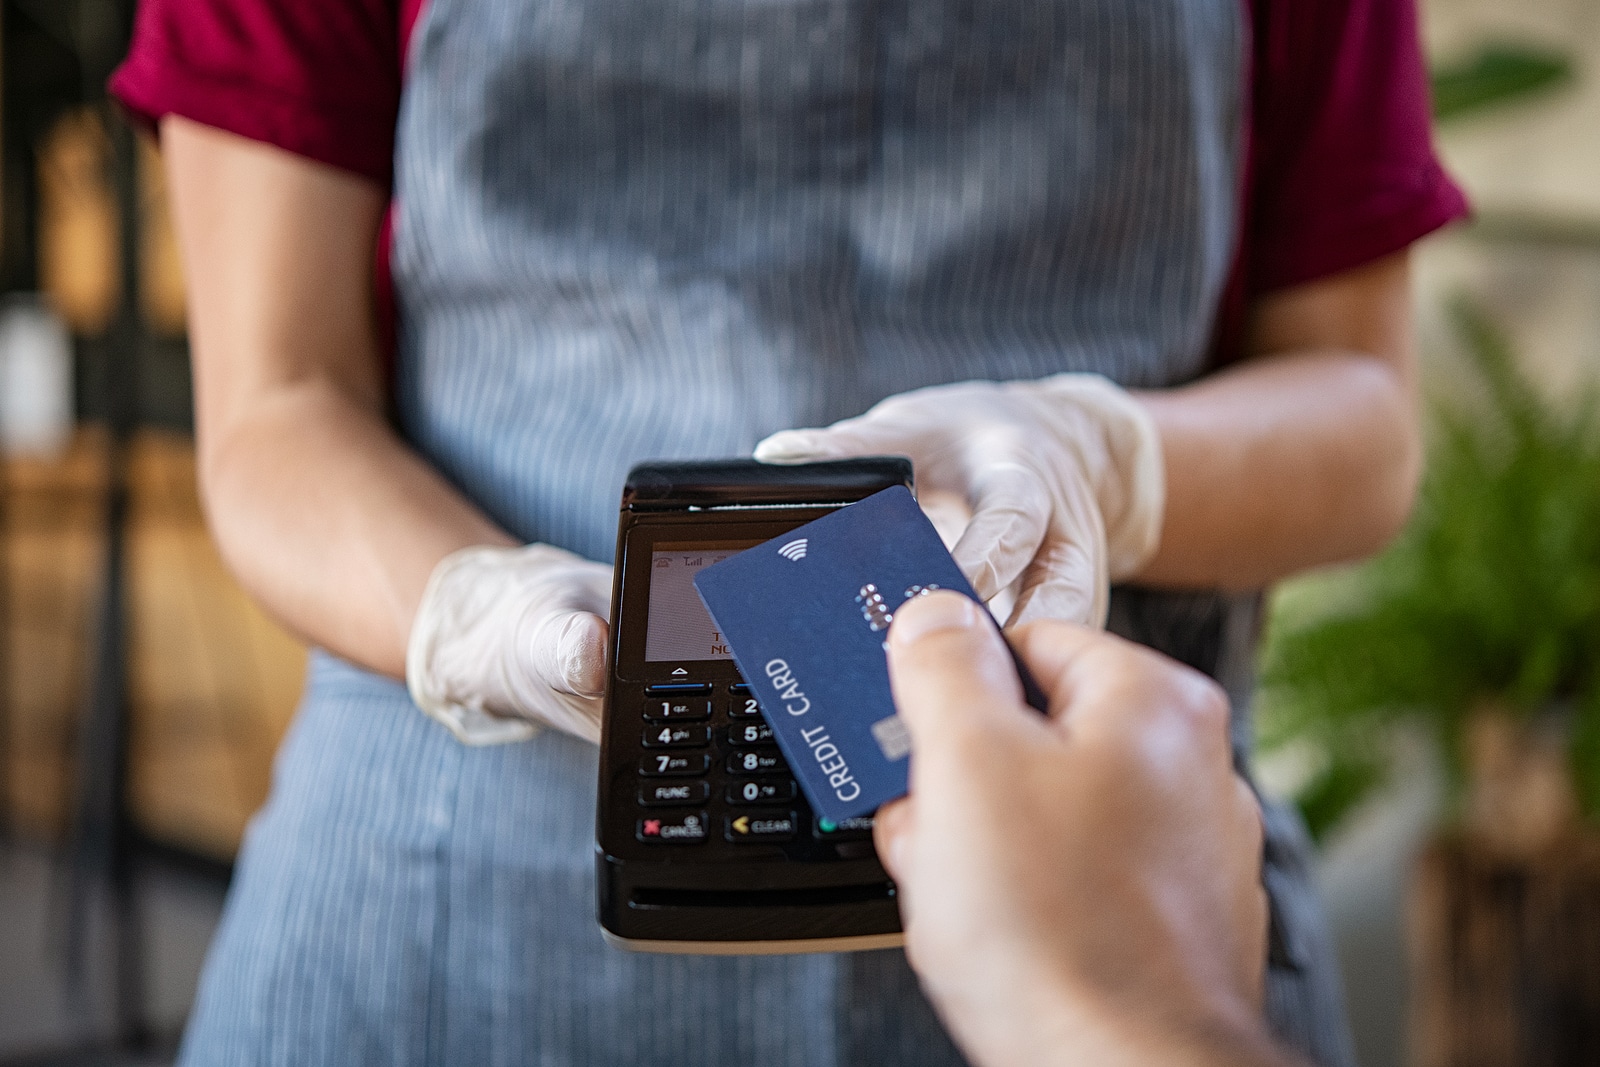 customer paying with contactless credit card with NFC technology